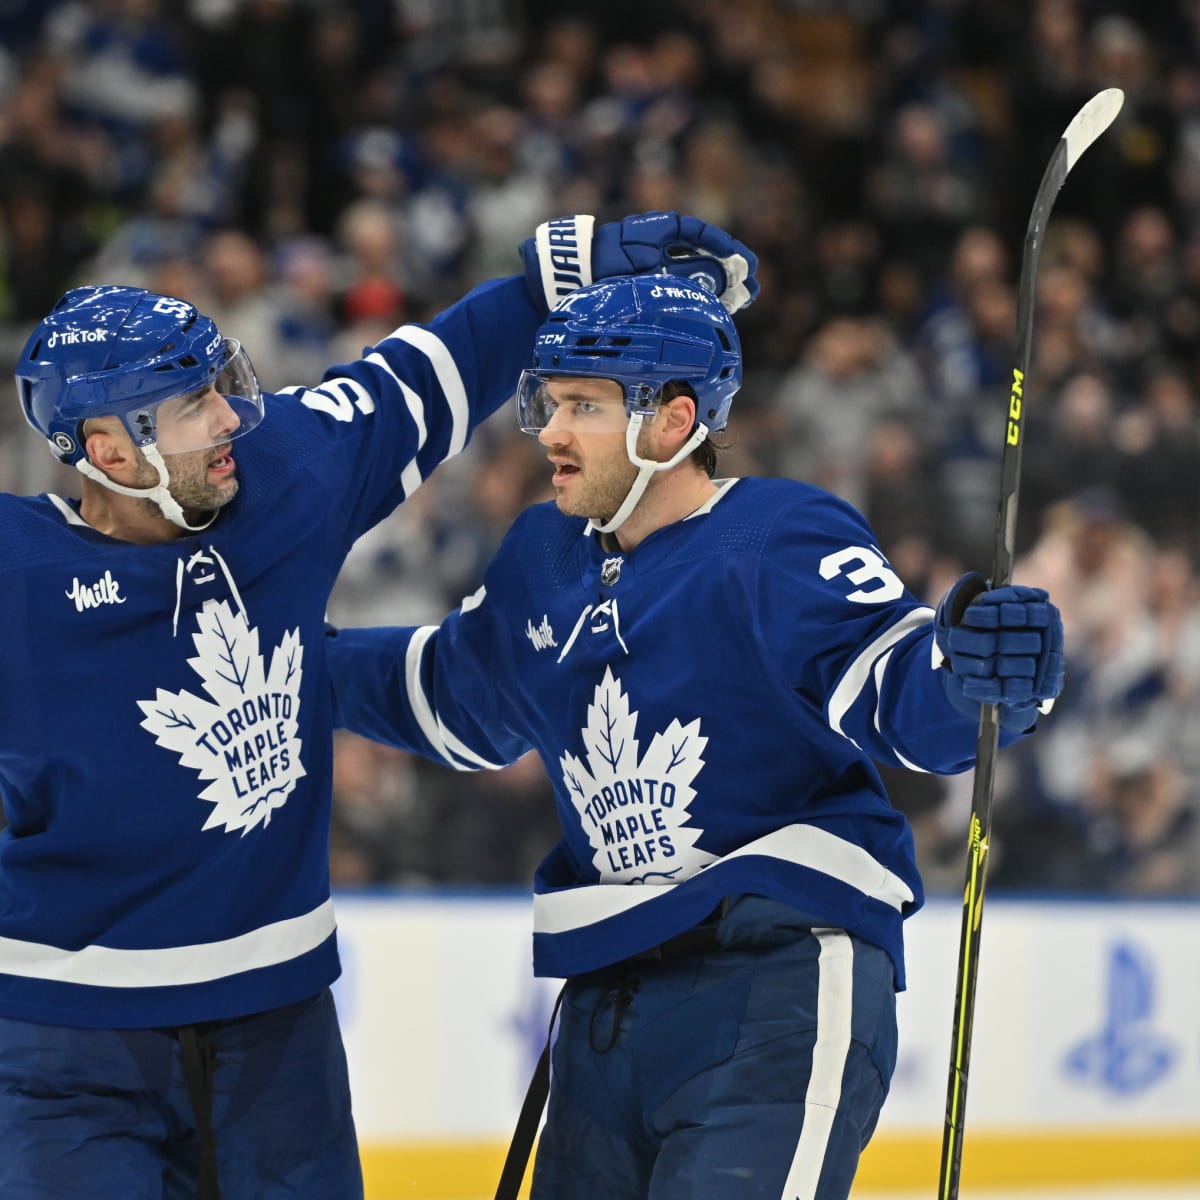 Toronto Maple Leafs: Marlies Without Regulation Loss This Season